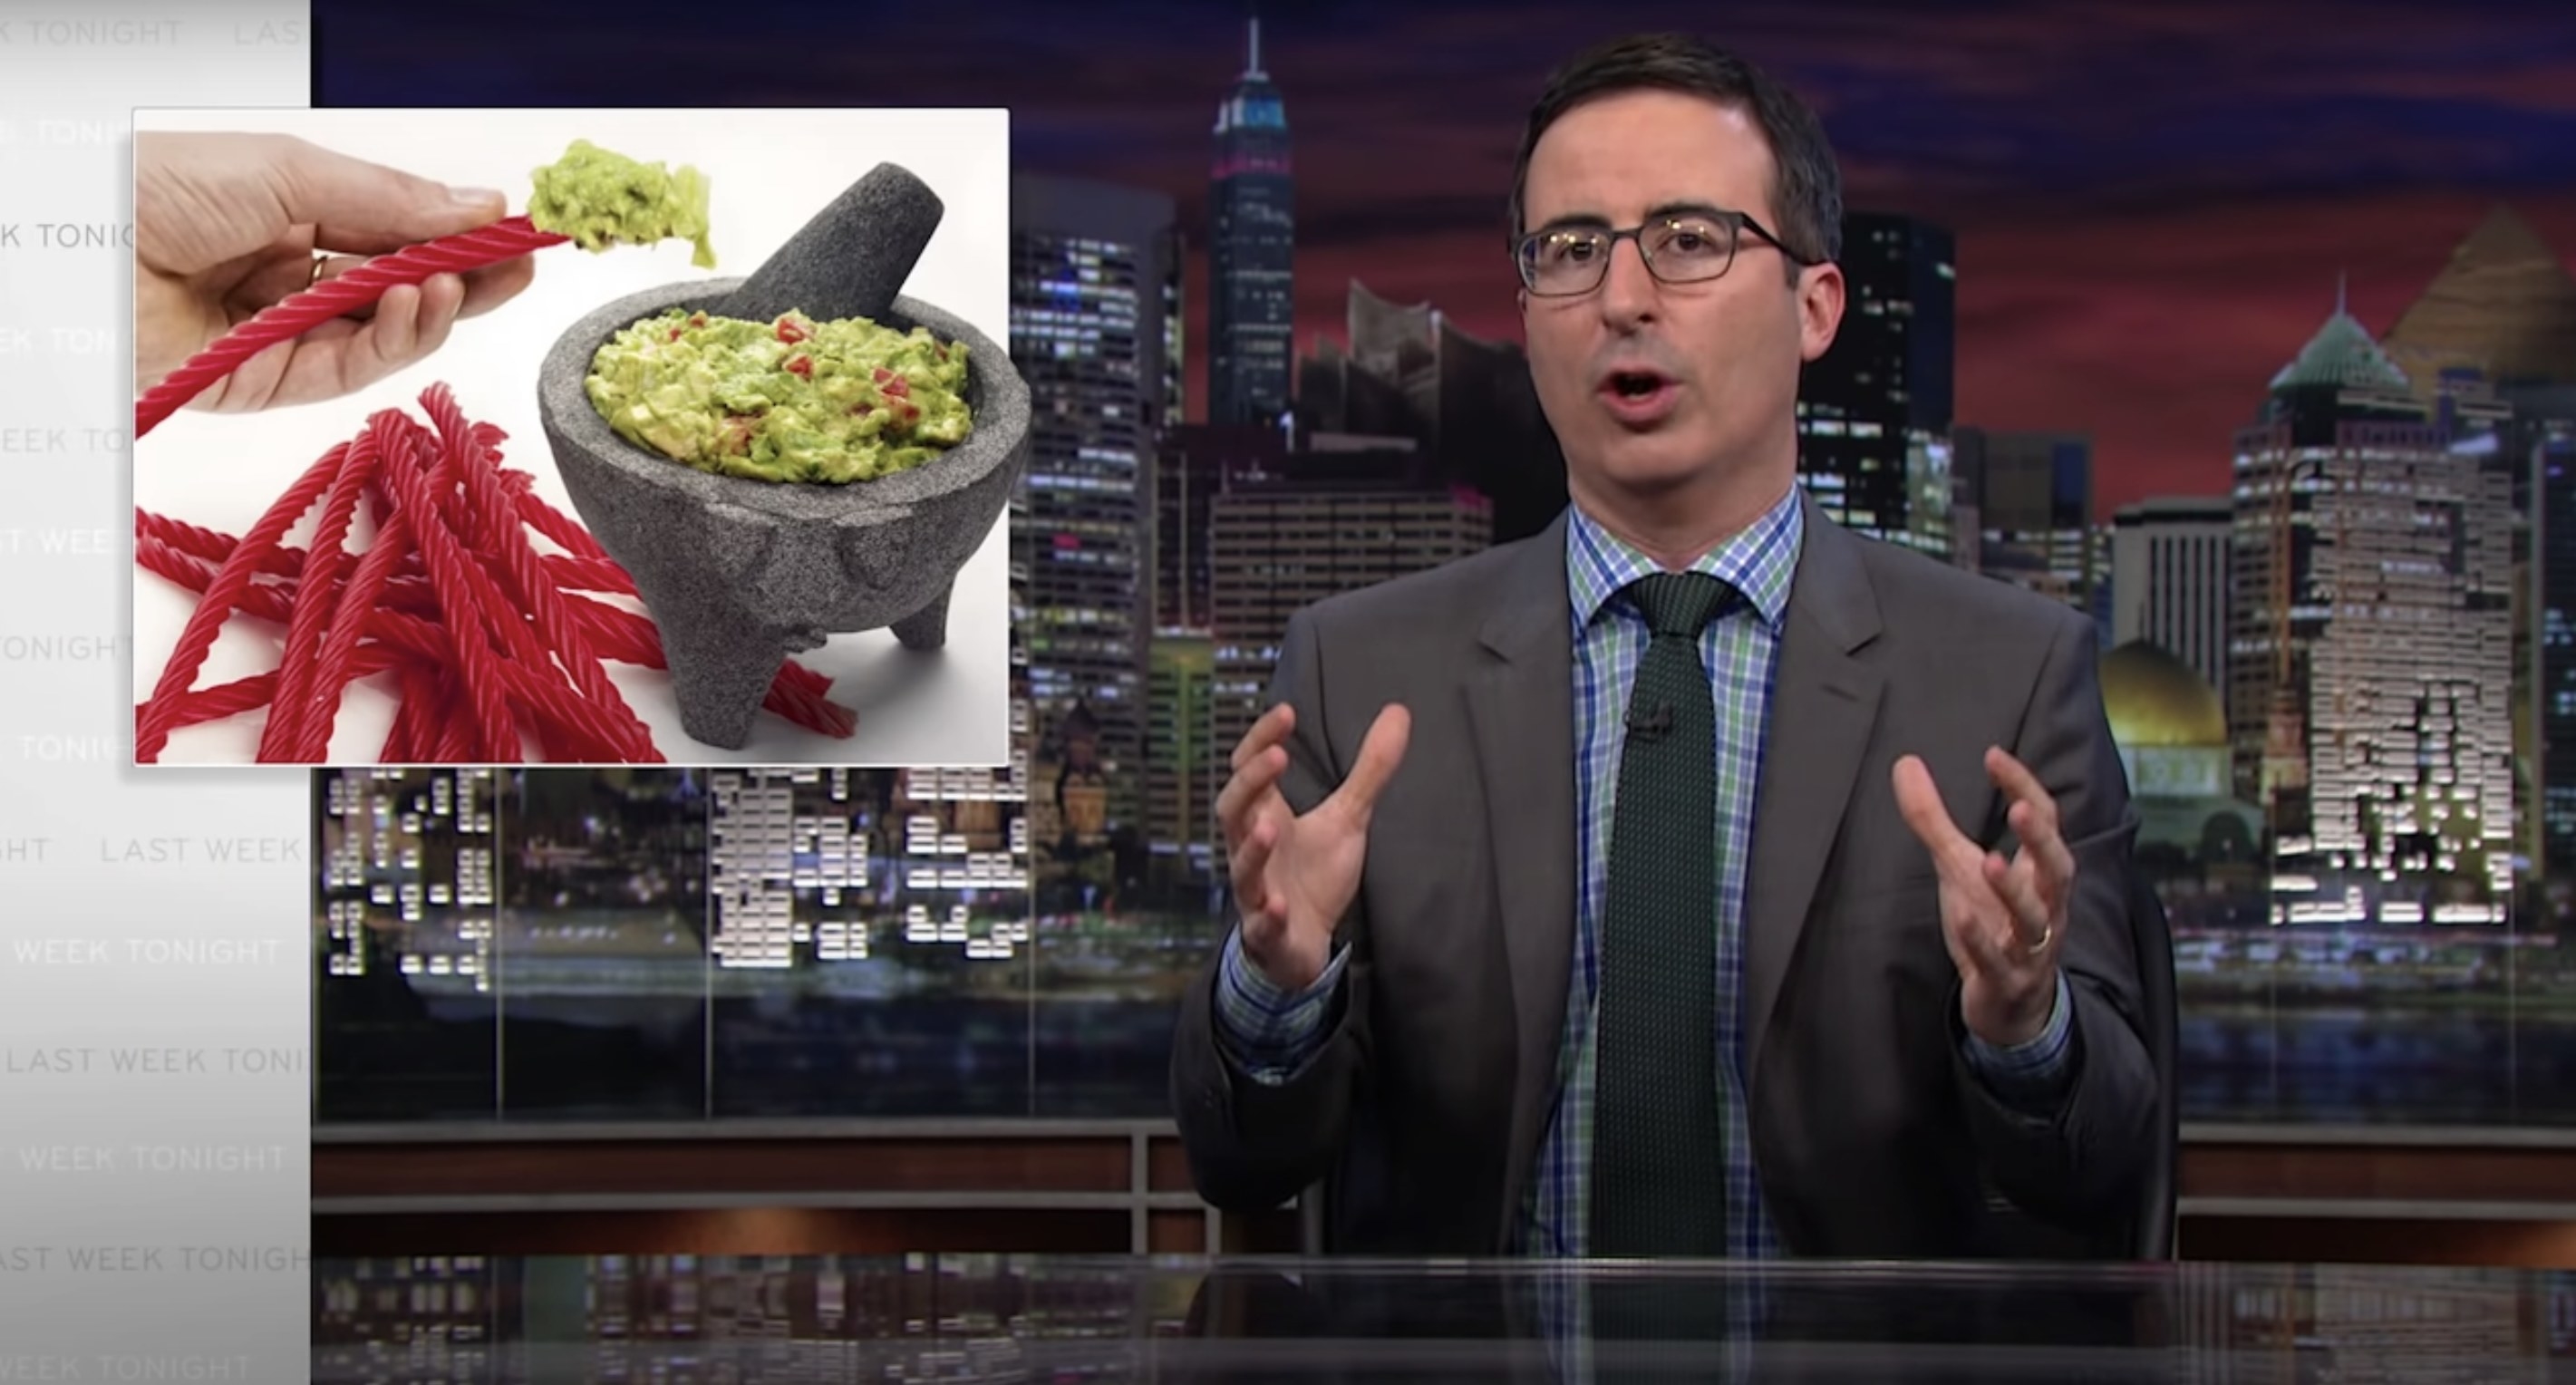 John Oliver at his desk, with an image of Twizzlers being dipped in guacamole next to him